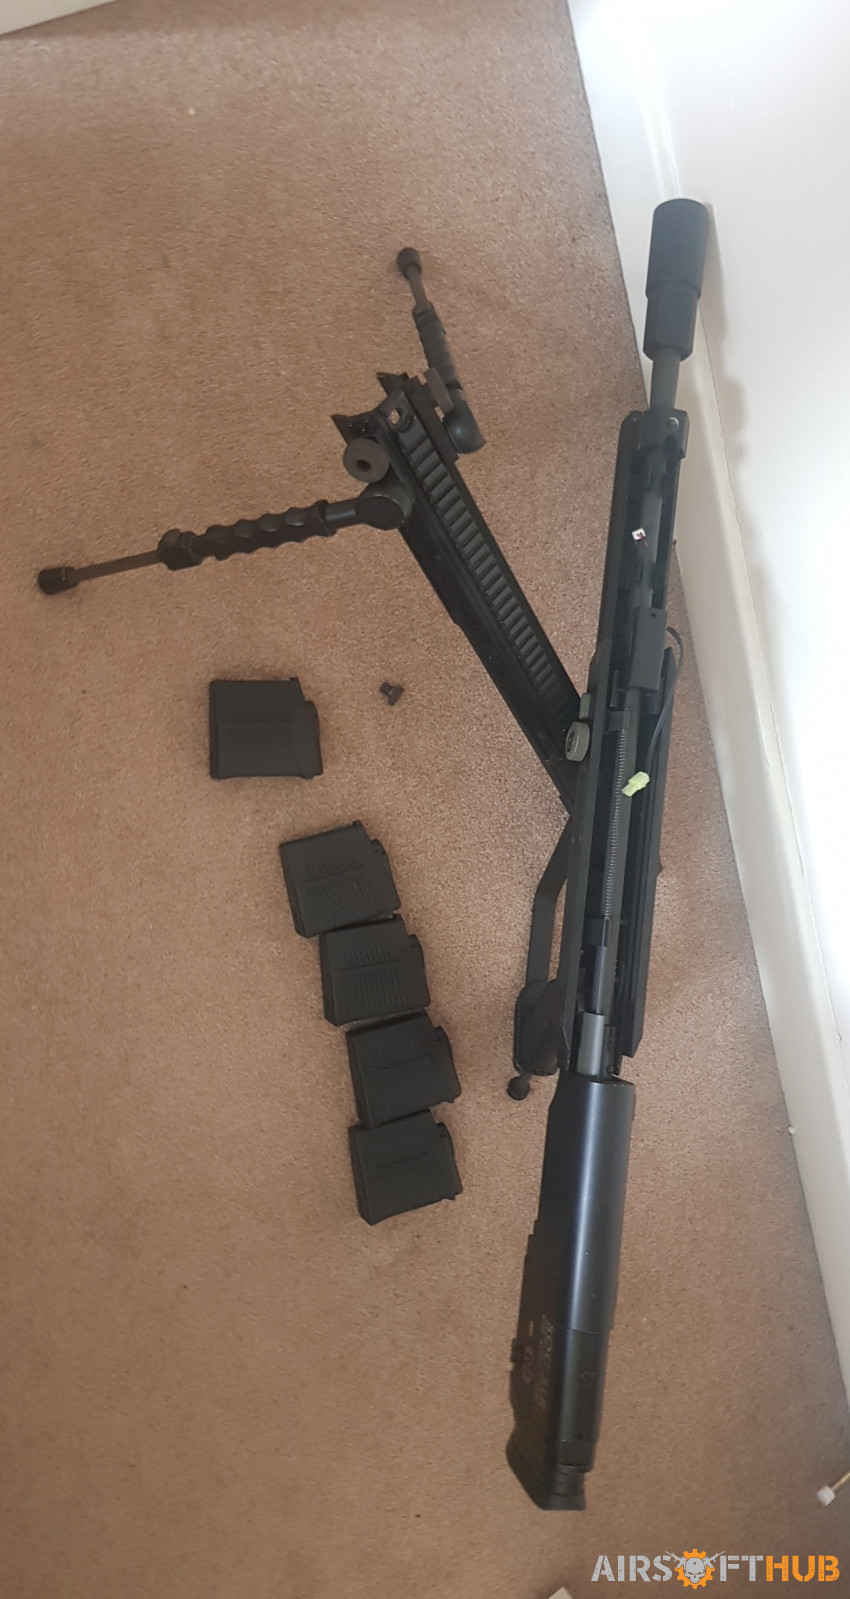 The Aries SOC SLR - Used airsoft equipment